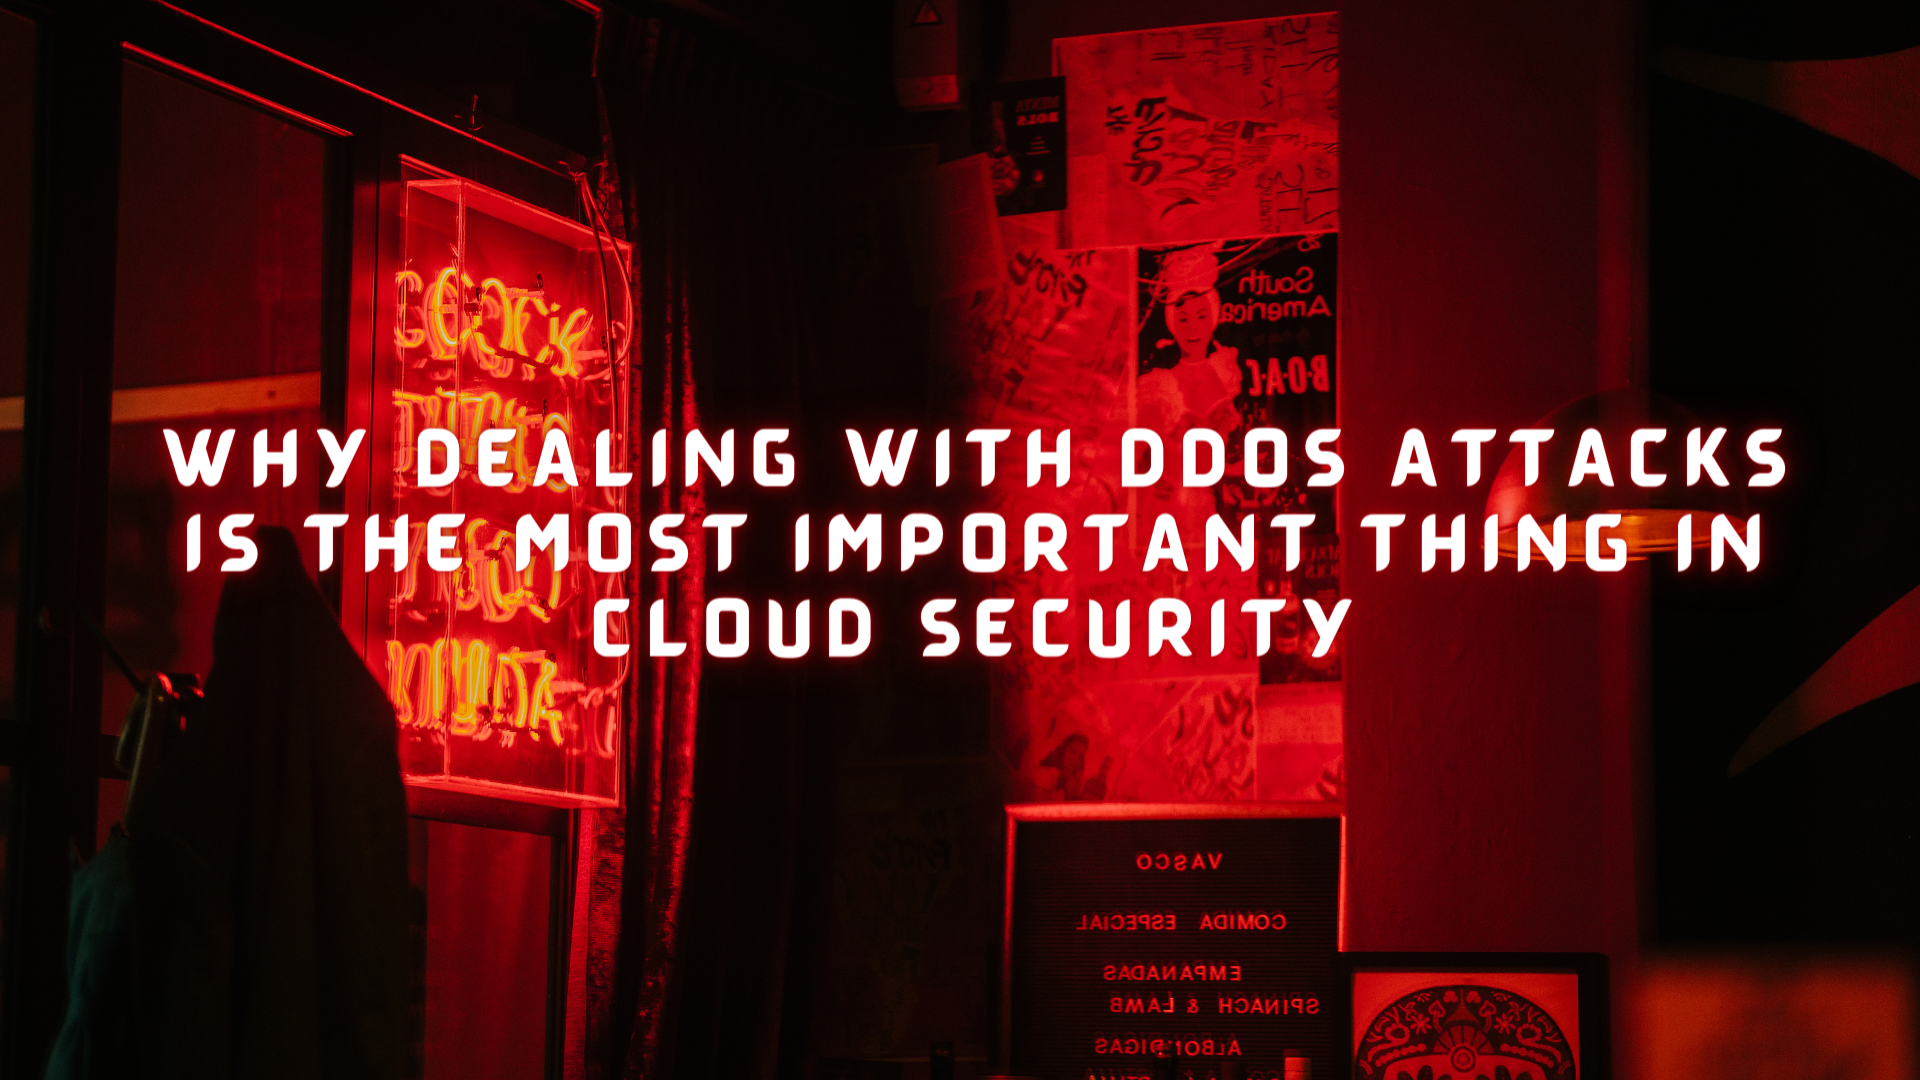 Why Dealing With DDoS Attacks Is The Most Important Thing In Cloud Security